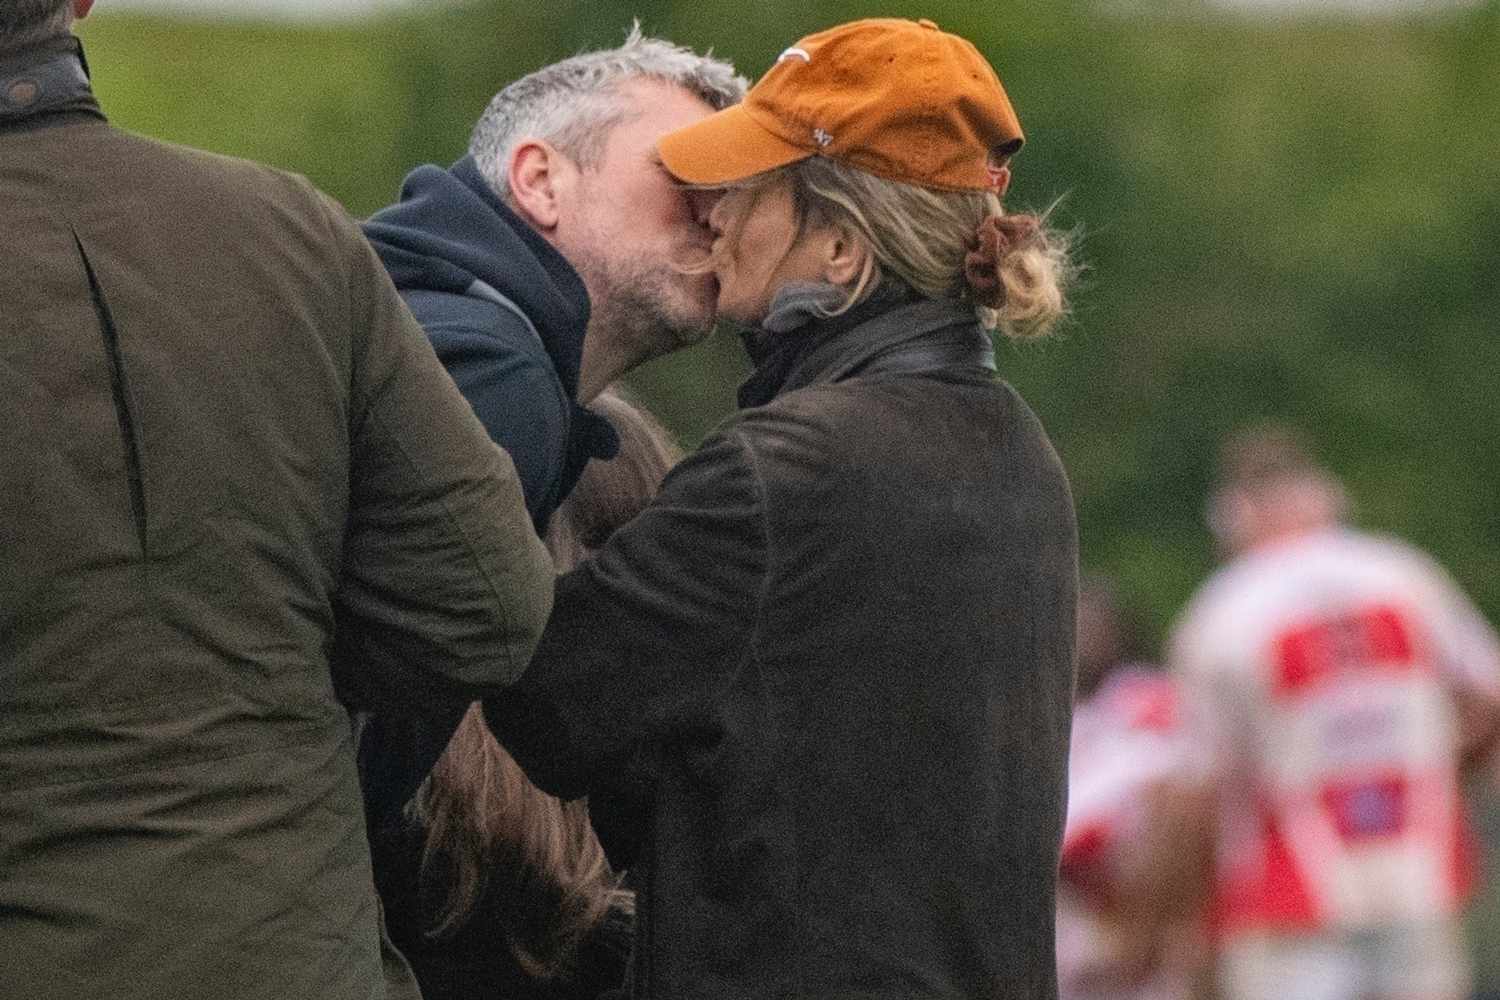 Renée Zellweger Spotted Kissing Ant Anstead in First London Sighting Since Arriving to Film 'Bridget Jones' Sequel